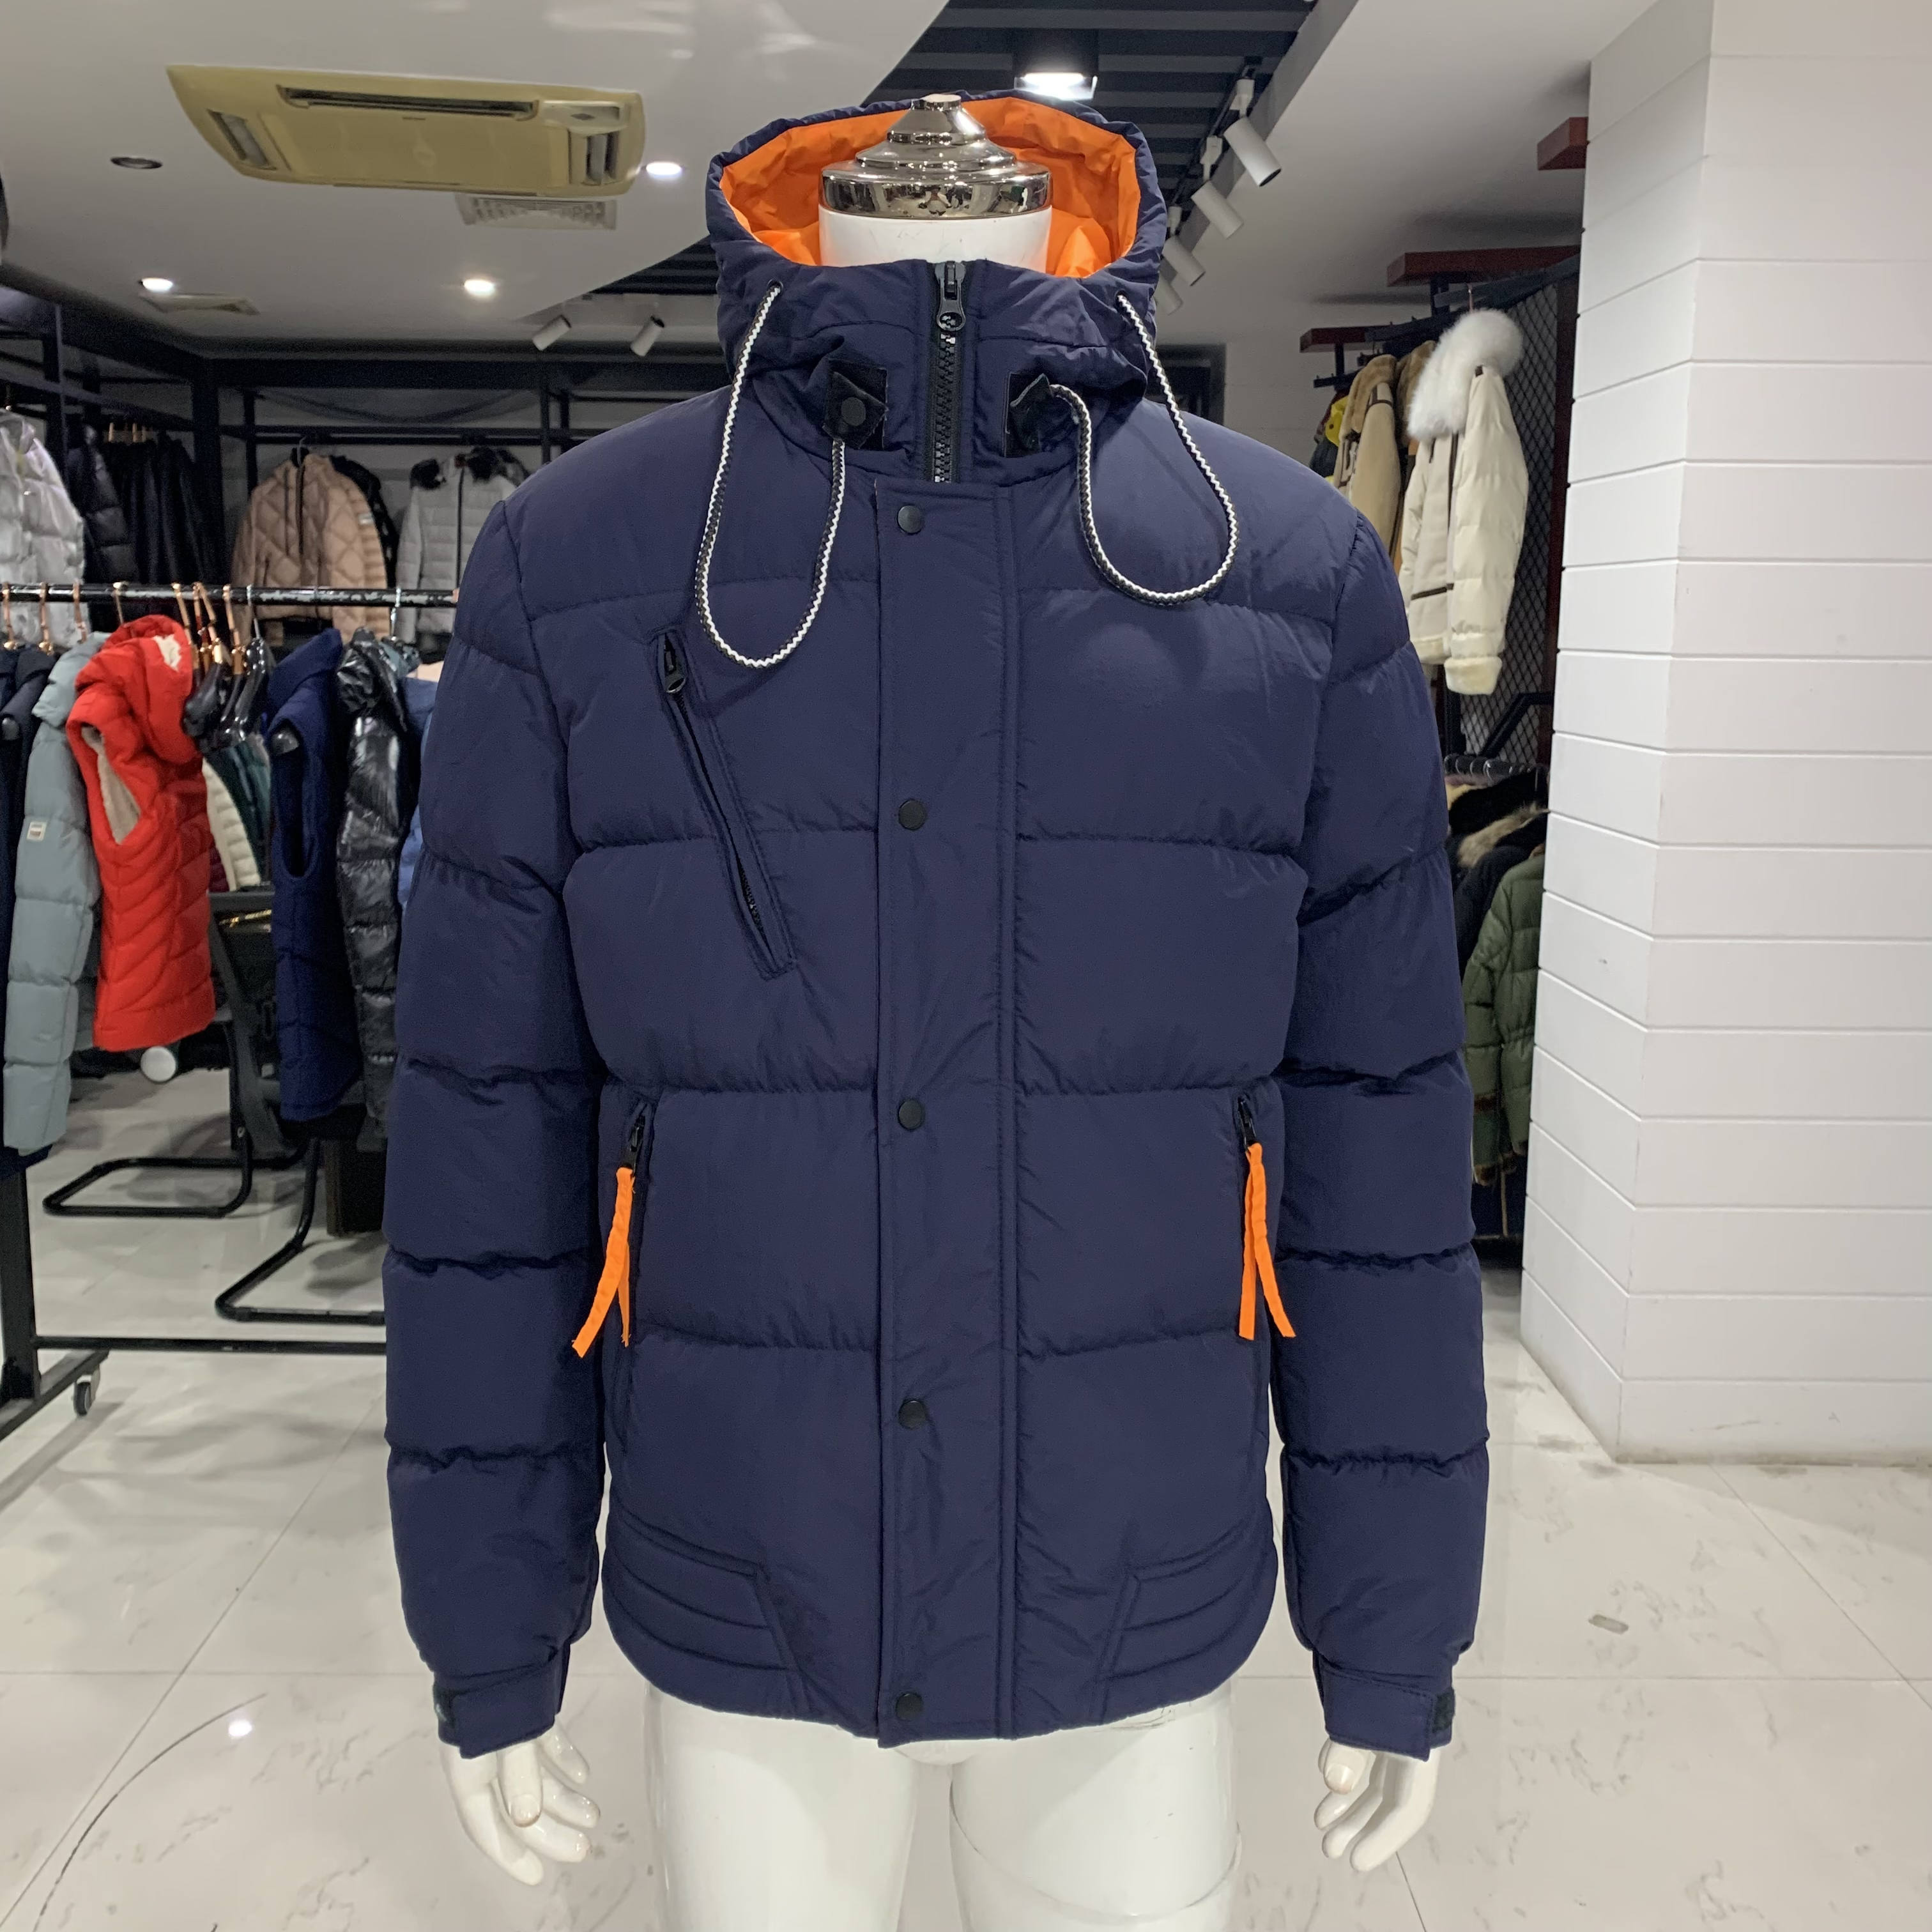 Men's winter business style puffy coat